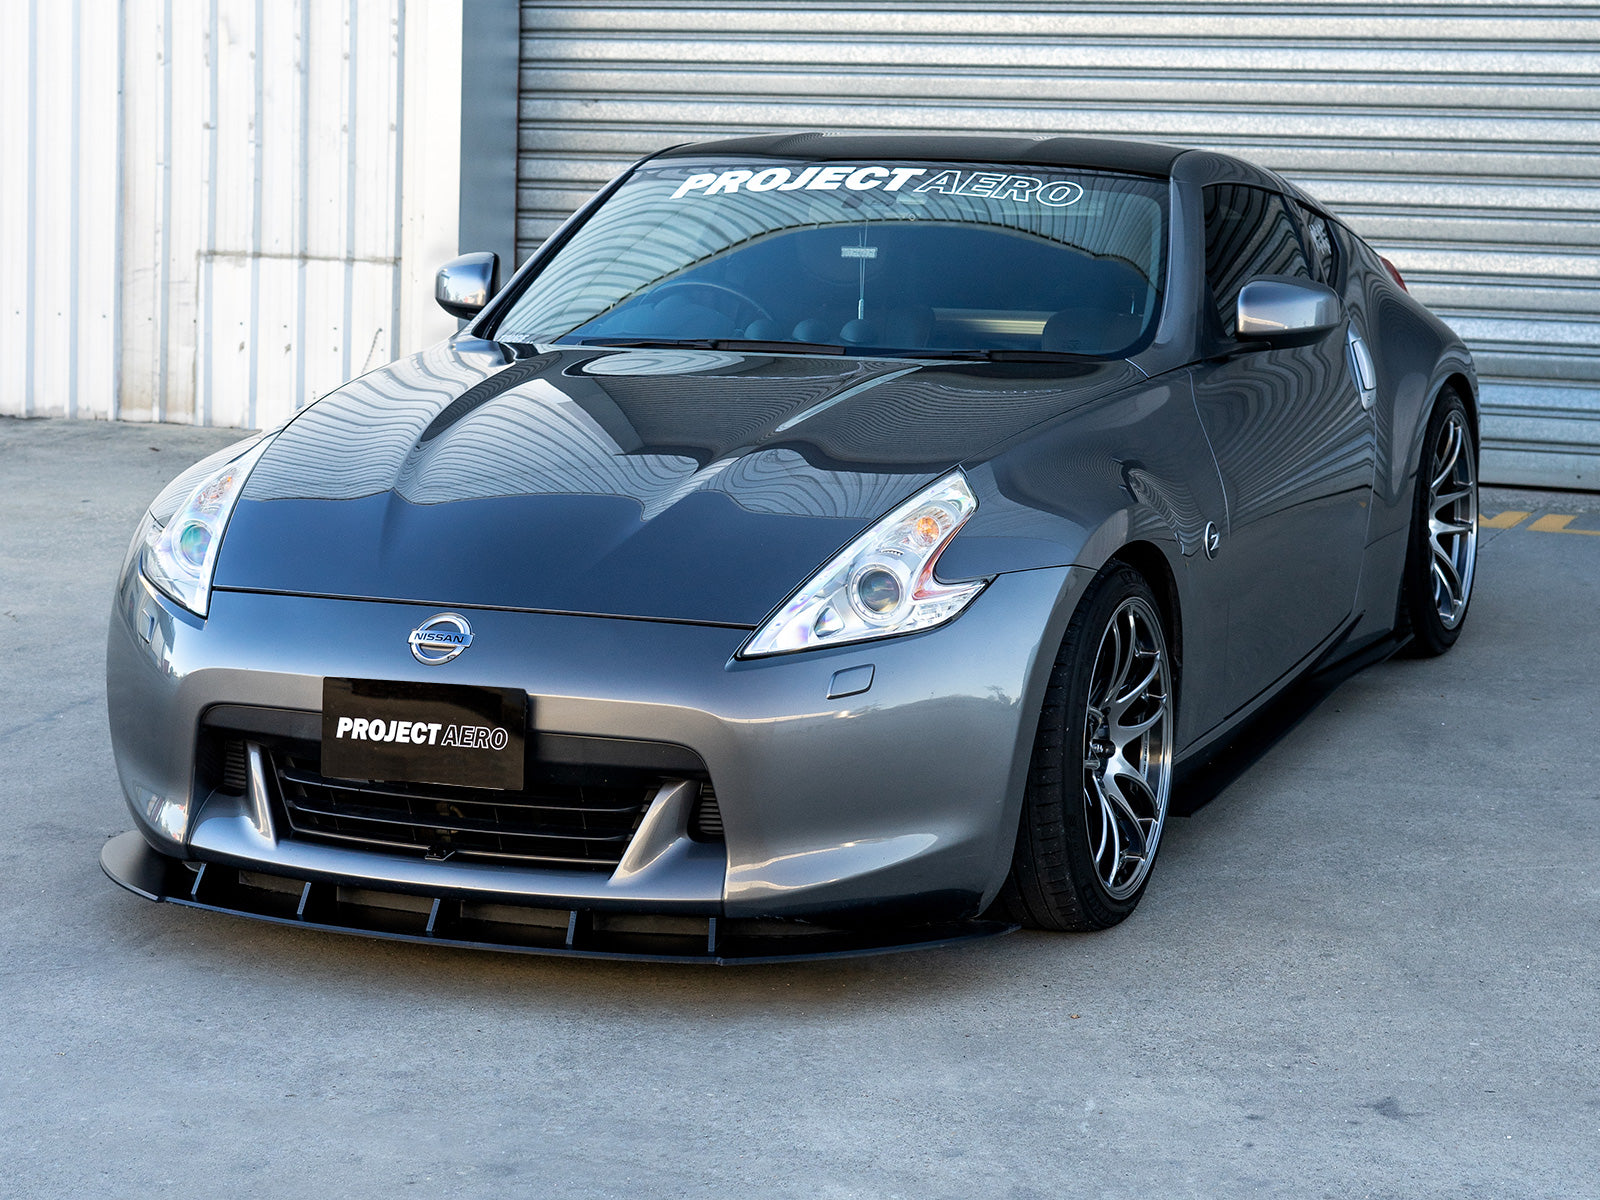 Complete splitter lip kit to suit the Nissan 370z. Splitters are a perfect addition to any 370z